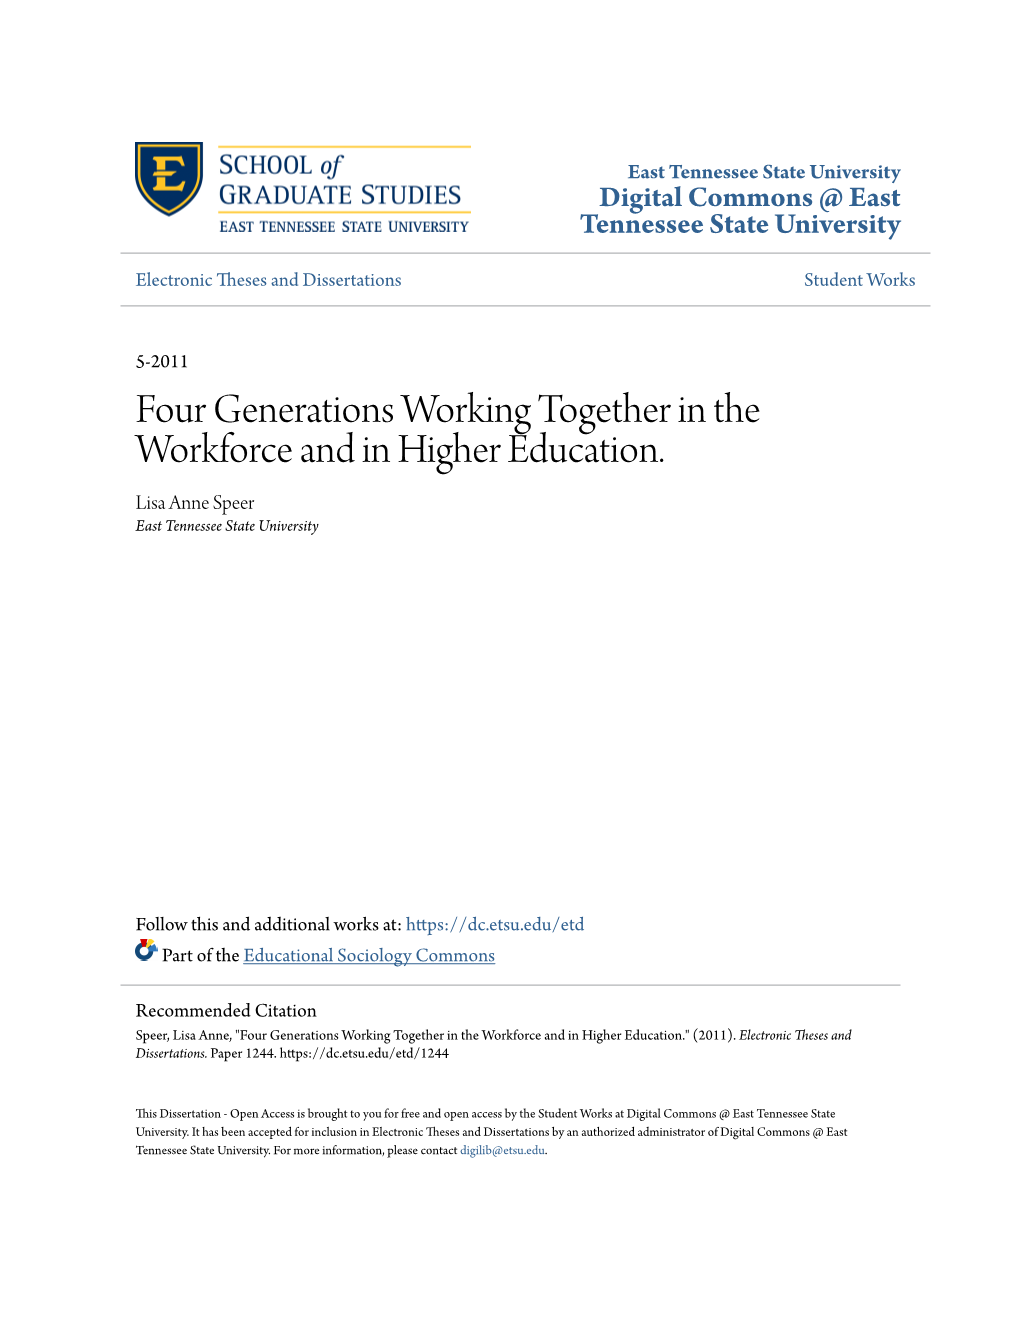 Four Generations Working Together in the Workforce and in Higher Education